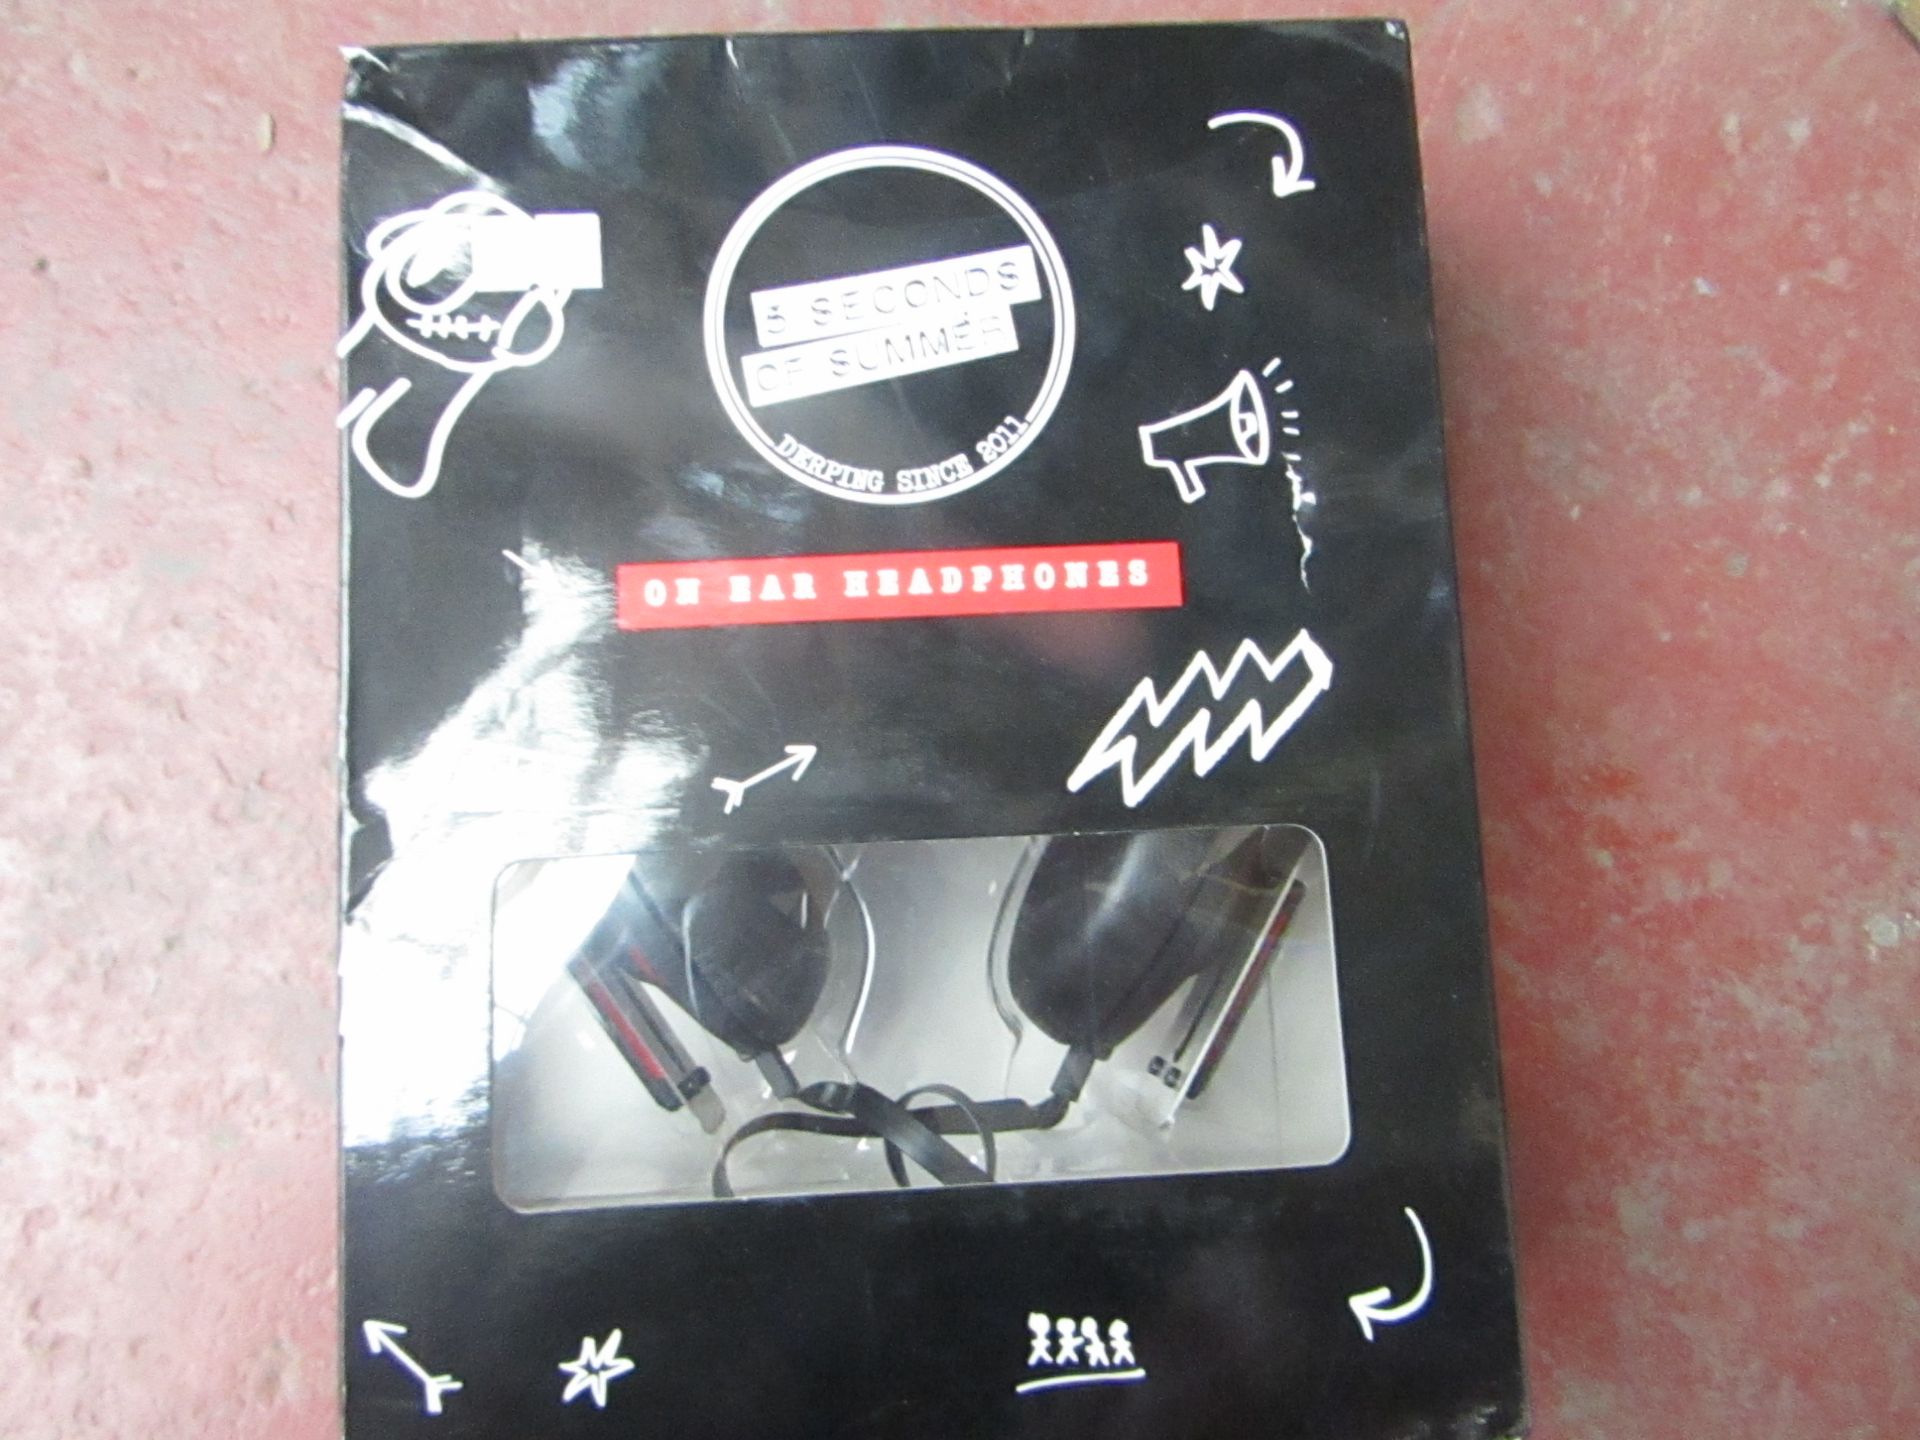 5 Seconds of Summer headphones, tested working and boxed.